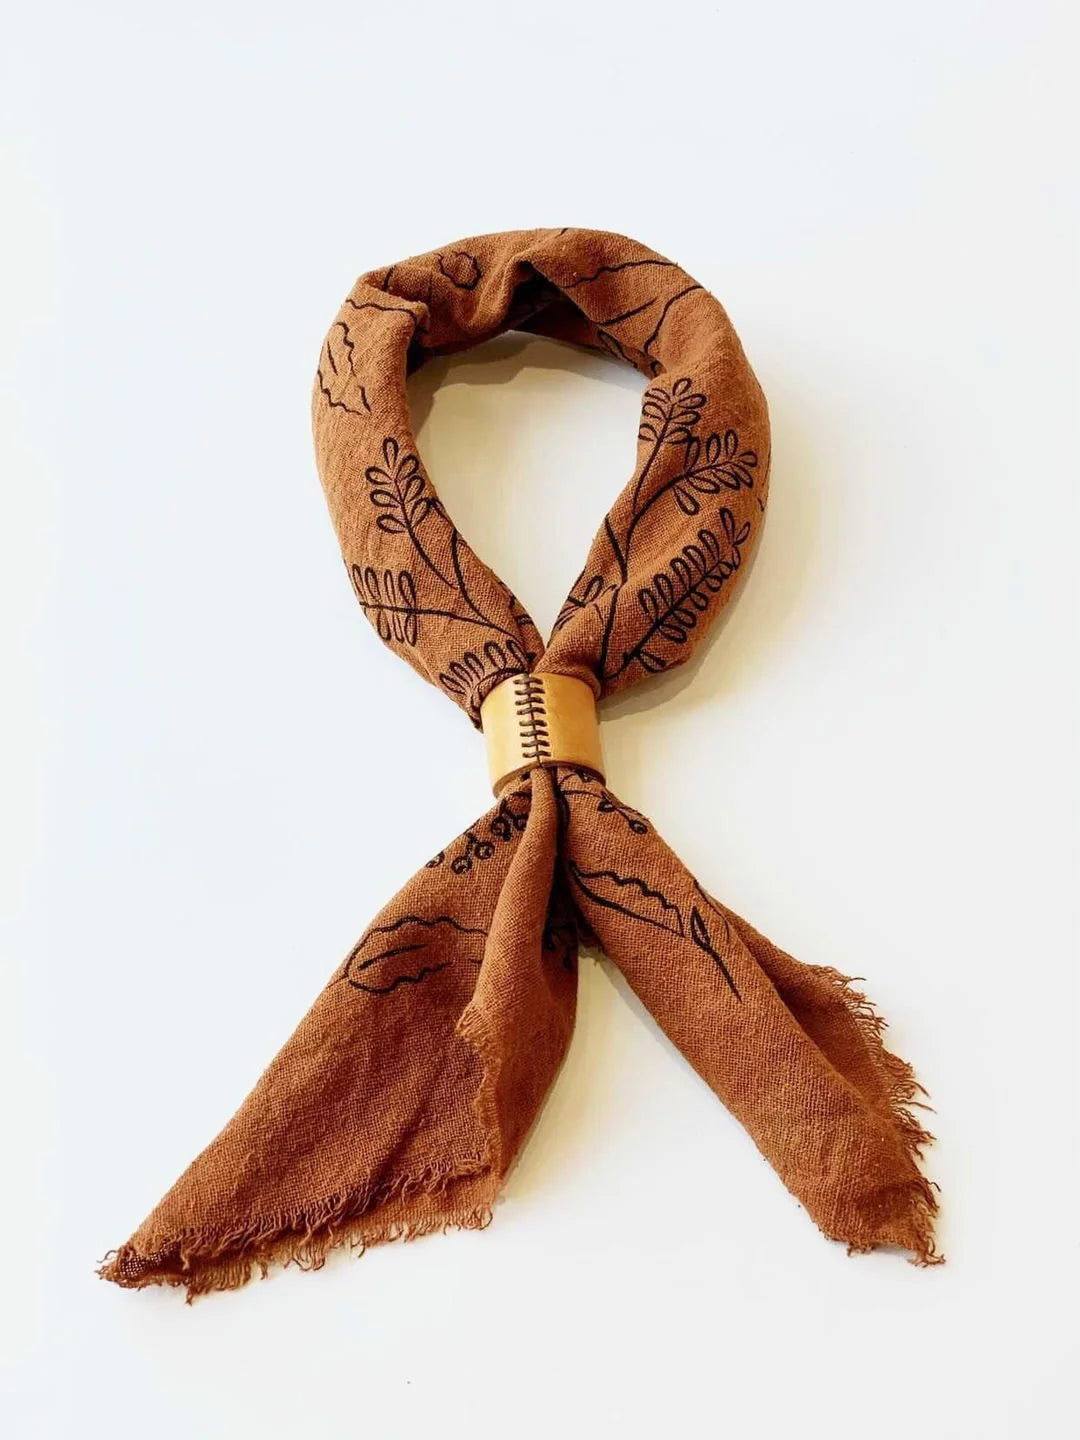 Naturally Dyed Leather Bolo Bandana Cuff - Light Brown